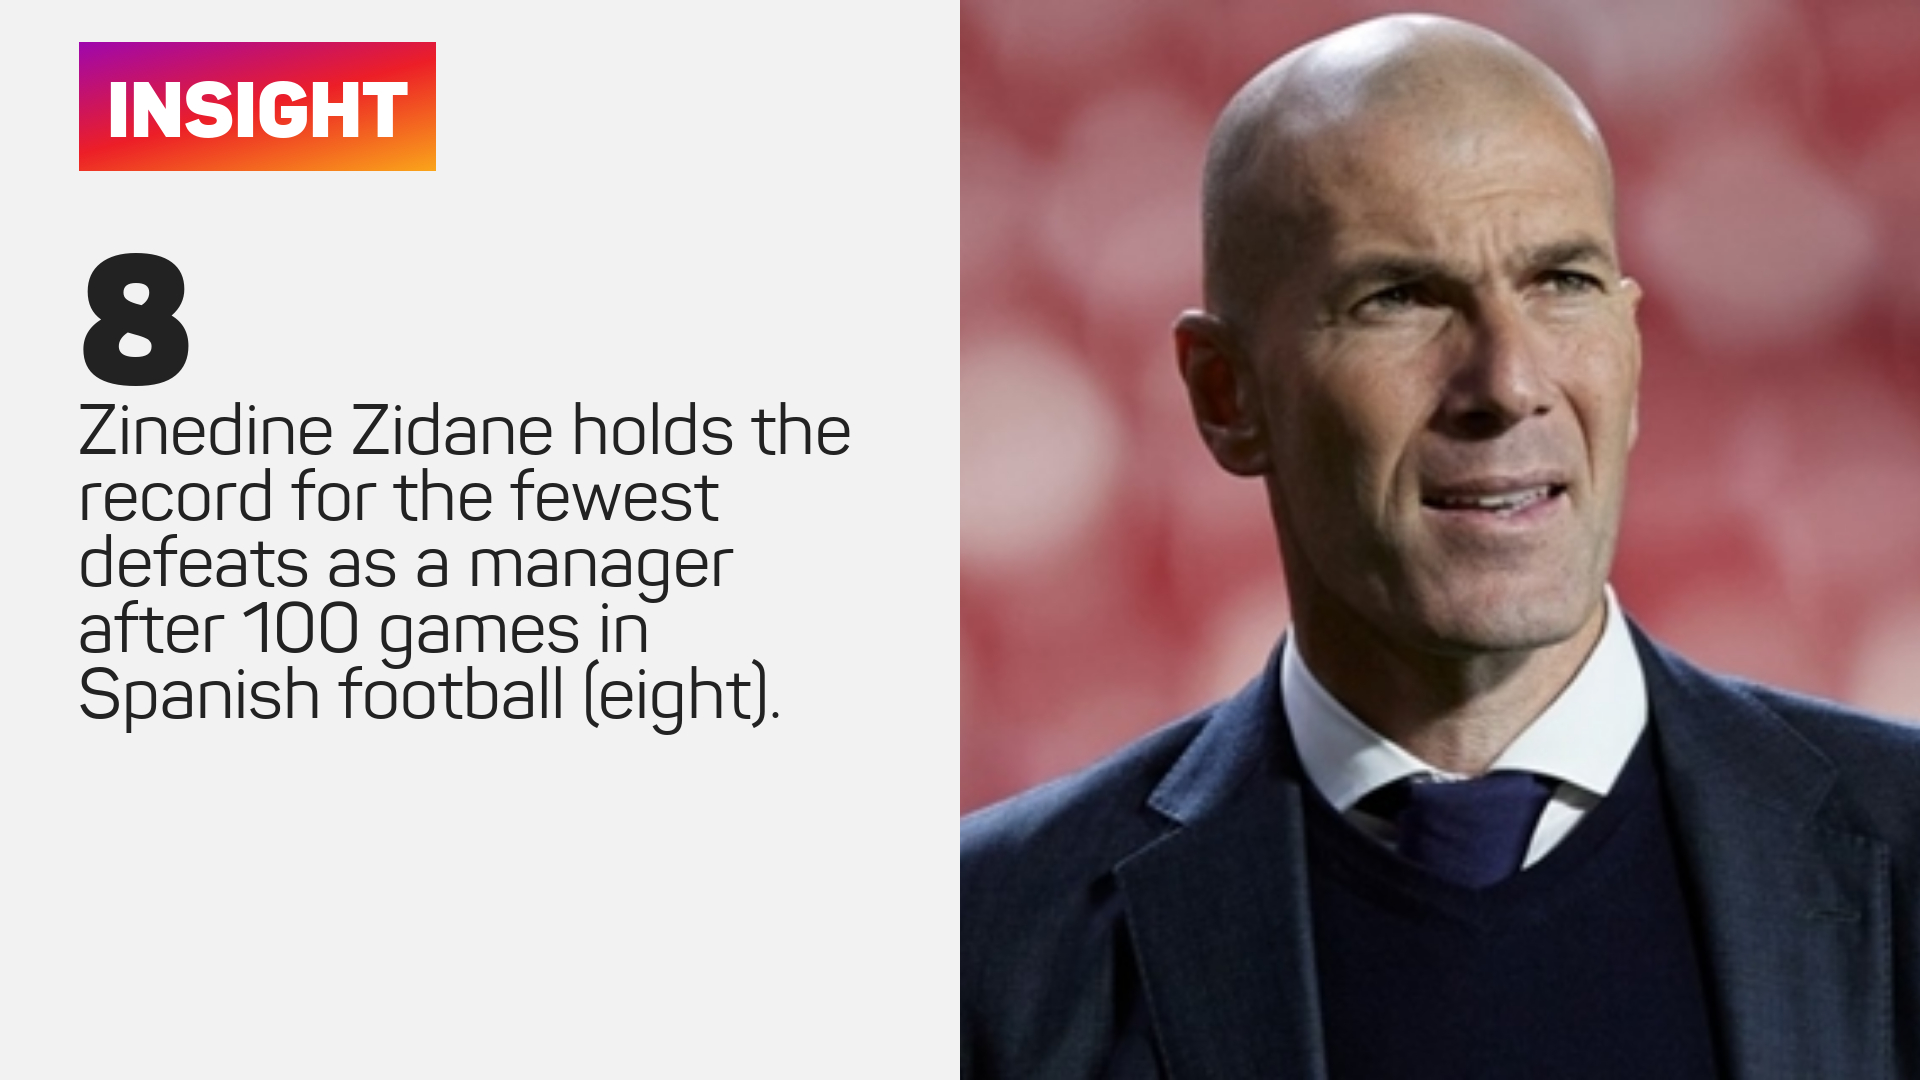 Zinedine Zidane holds the record for the fewest defeats after 100 games in Spanish football